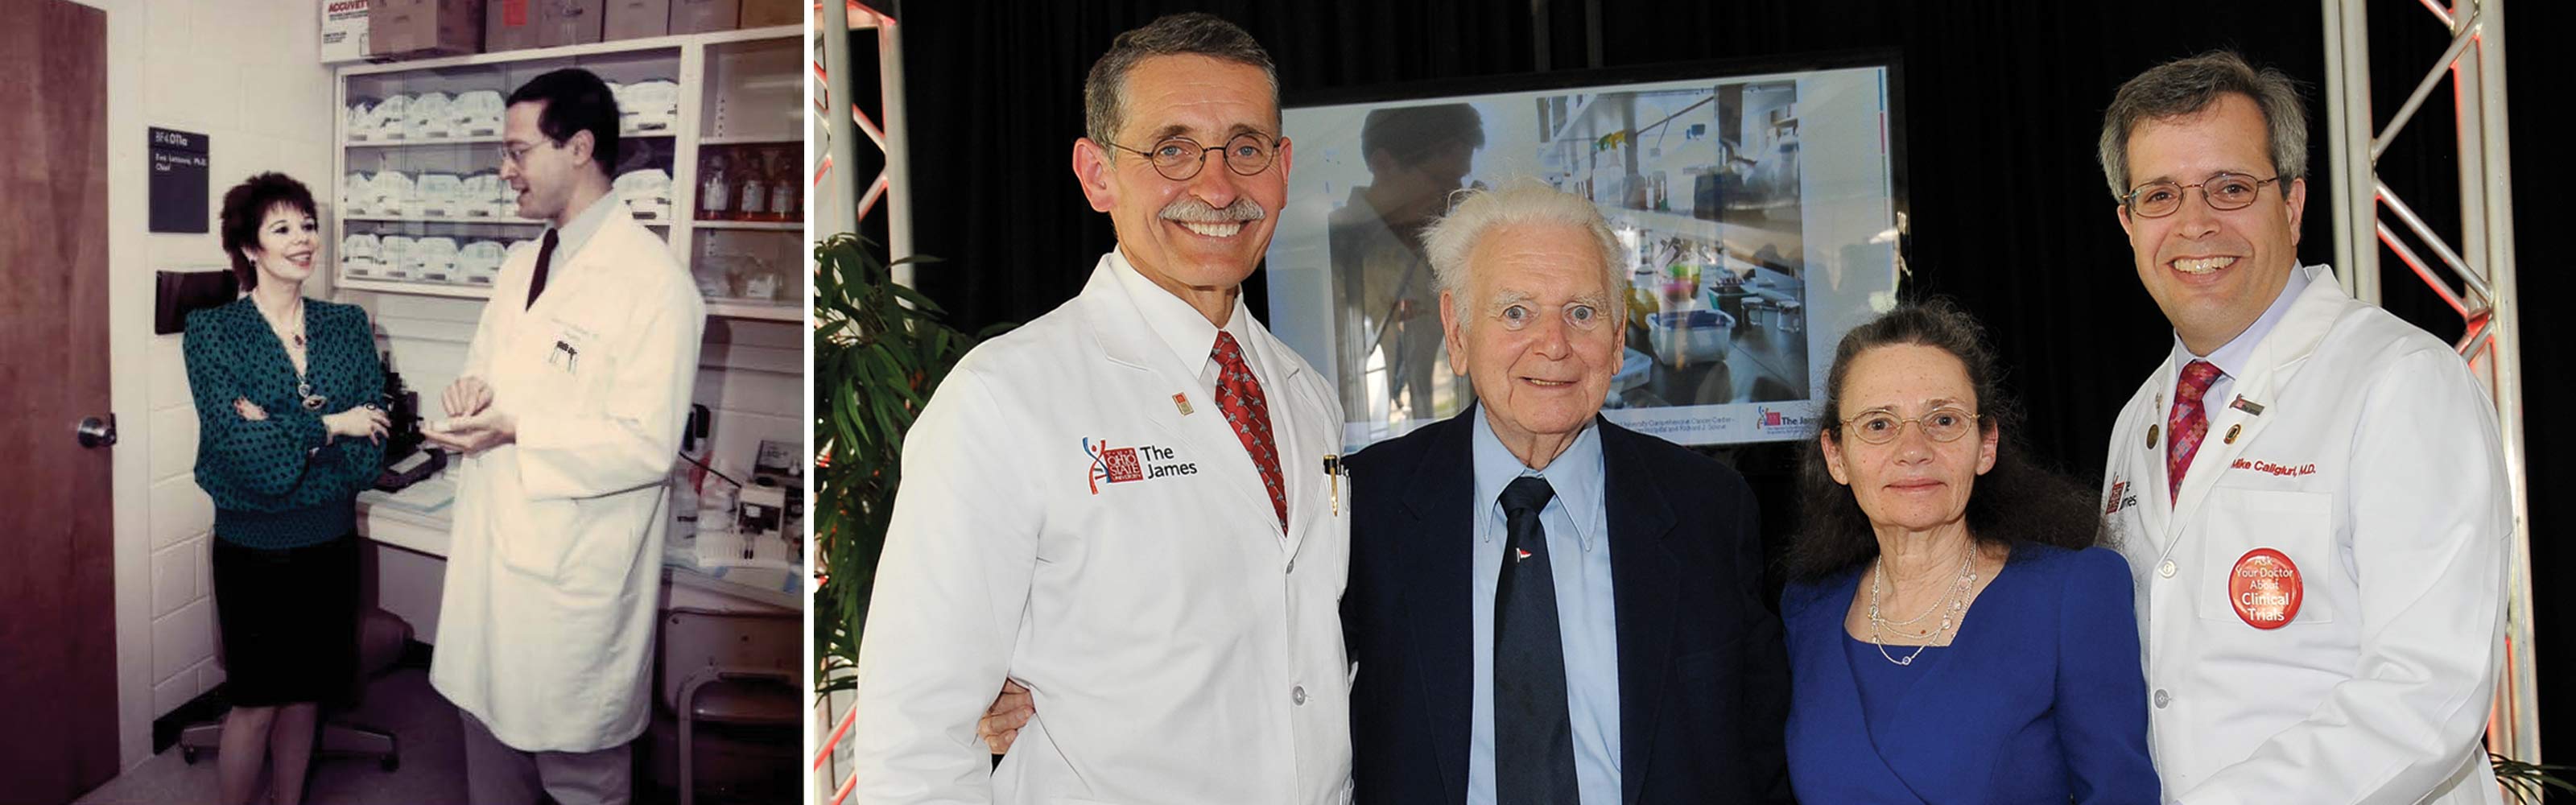 Figures who helped shape Ohio State’s Comprehensive Cancer Center